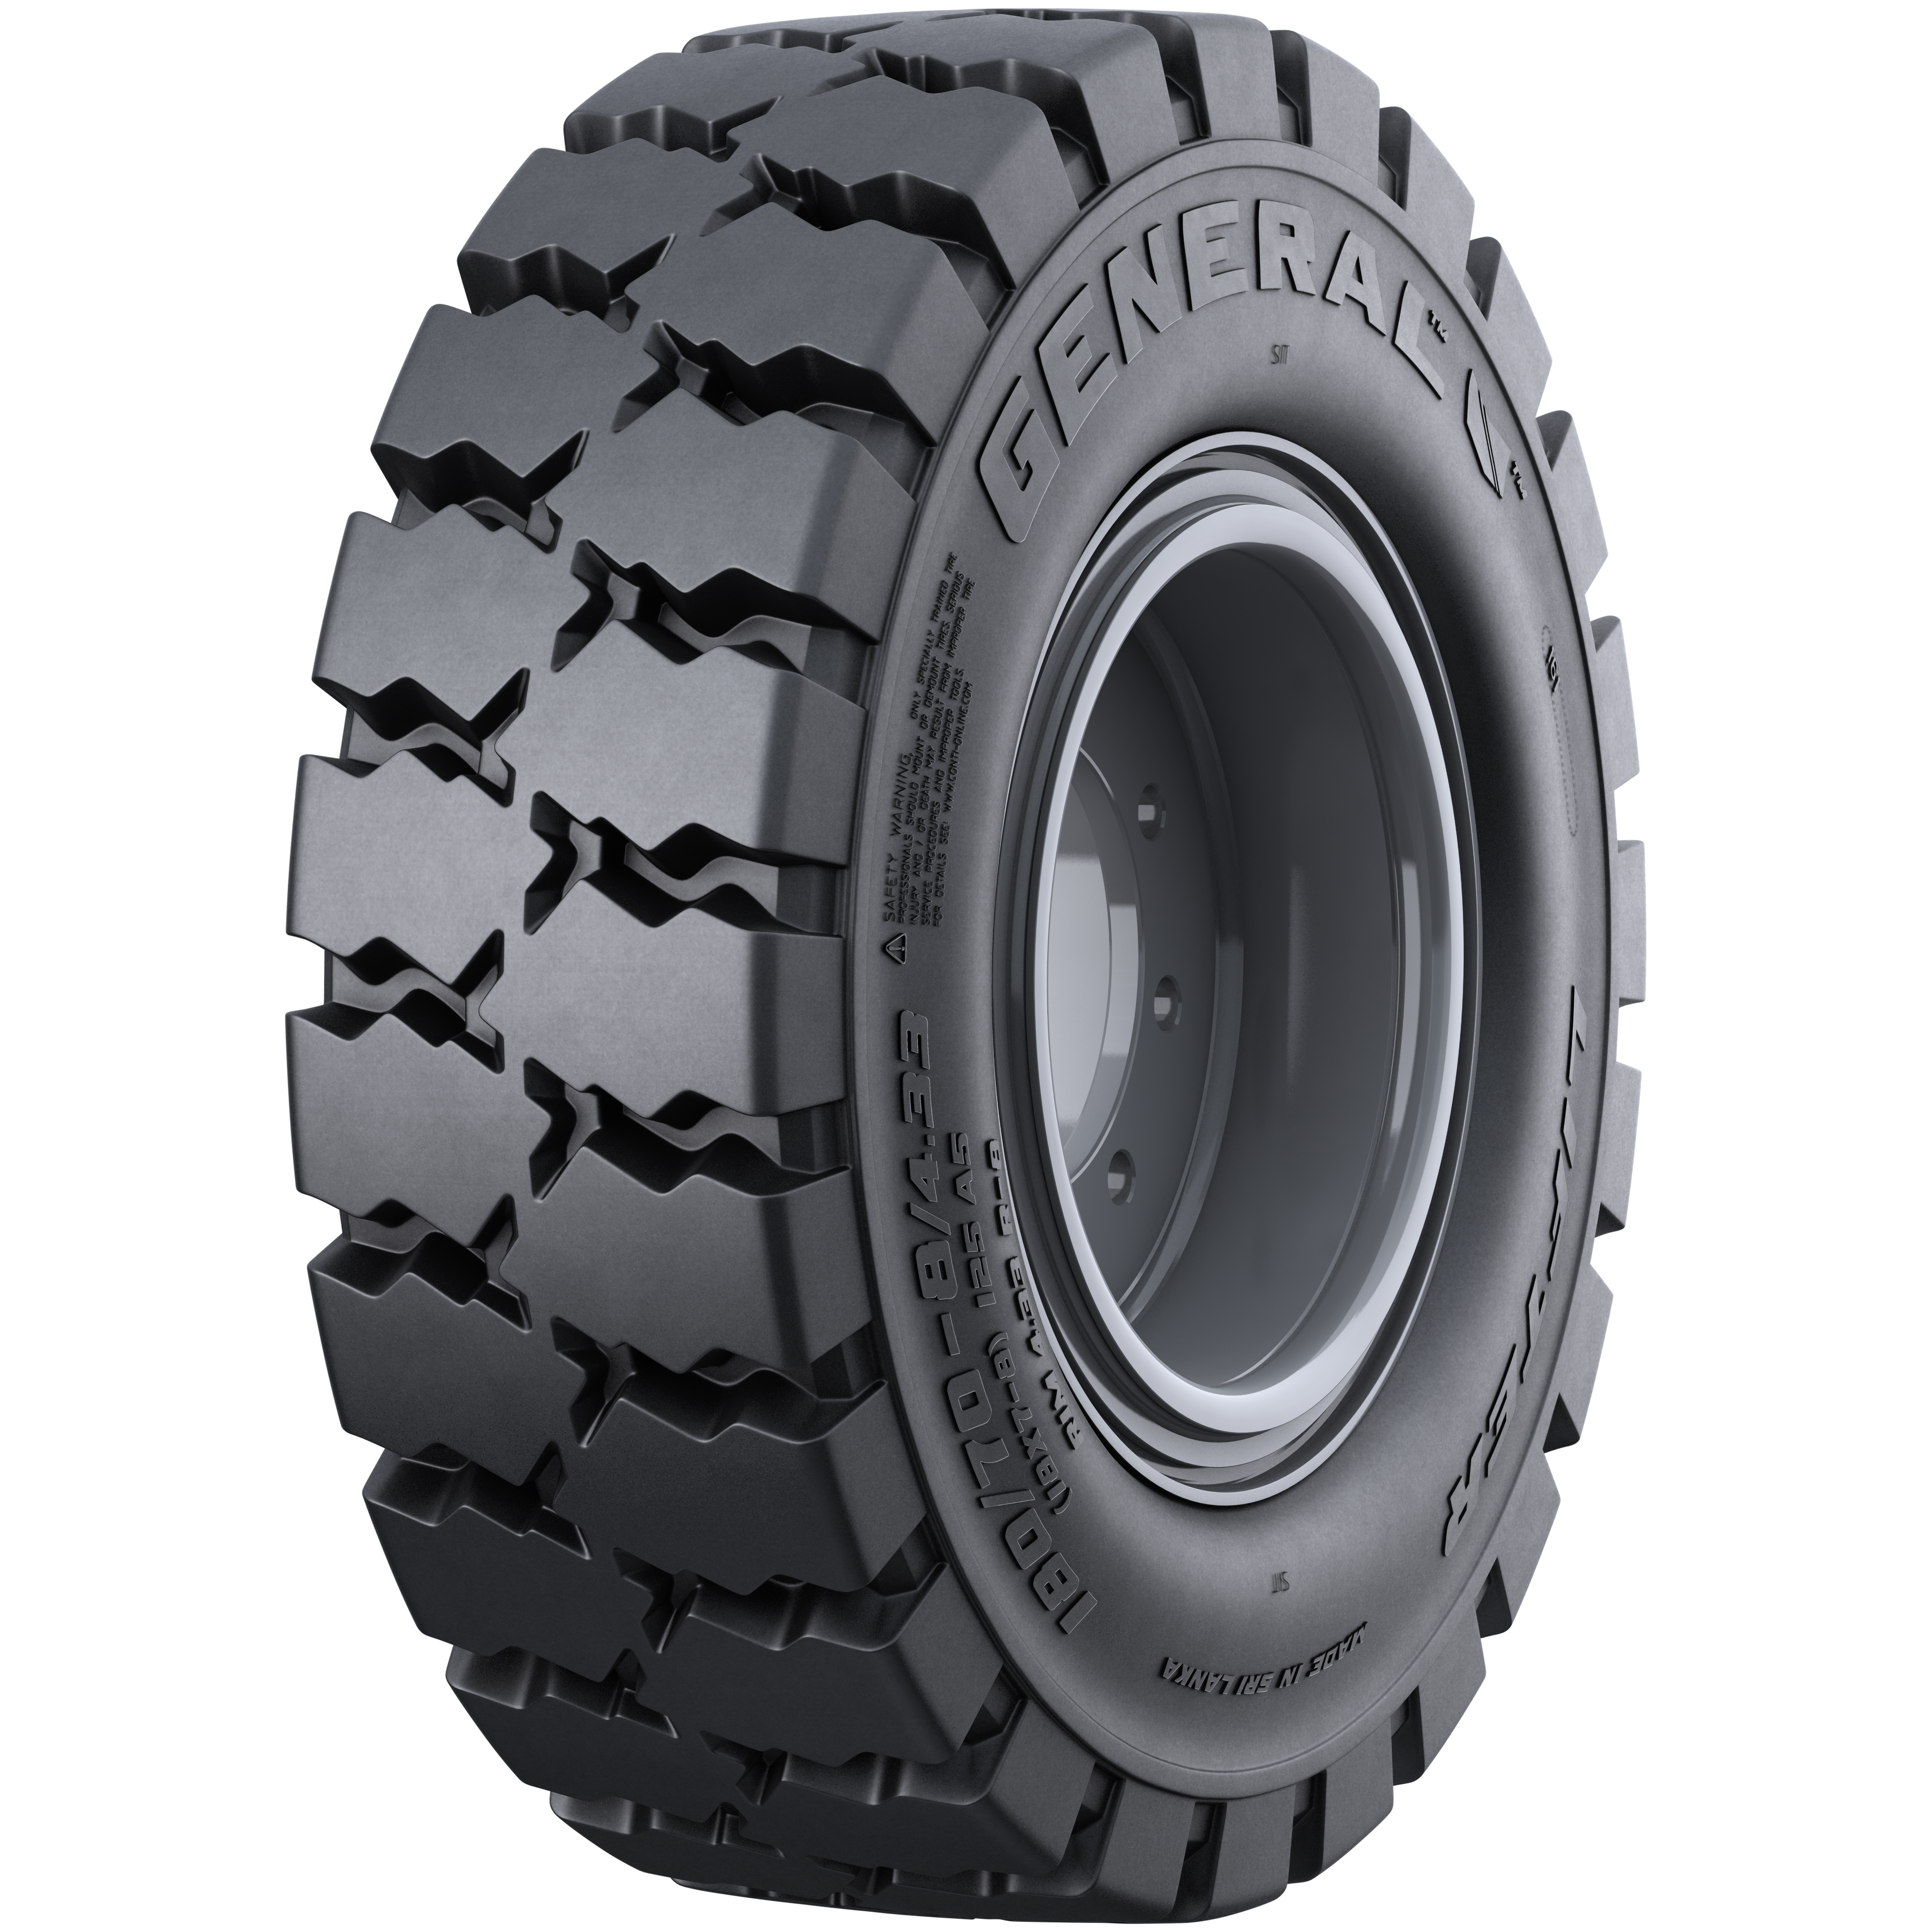 General Tire Lifter